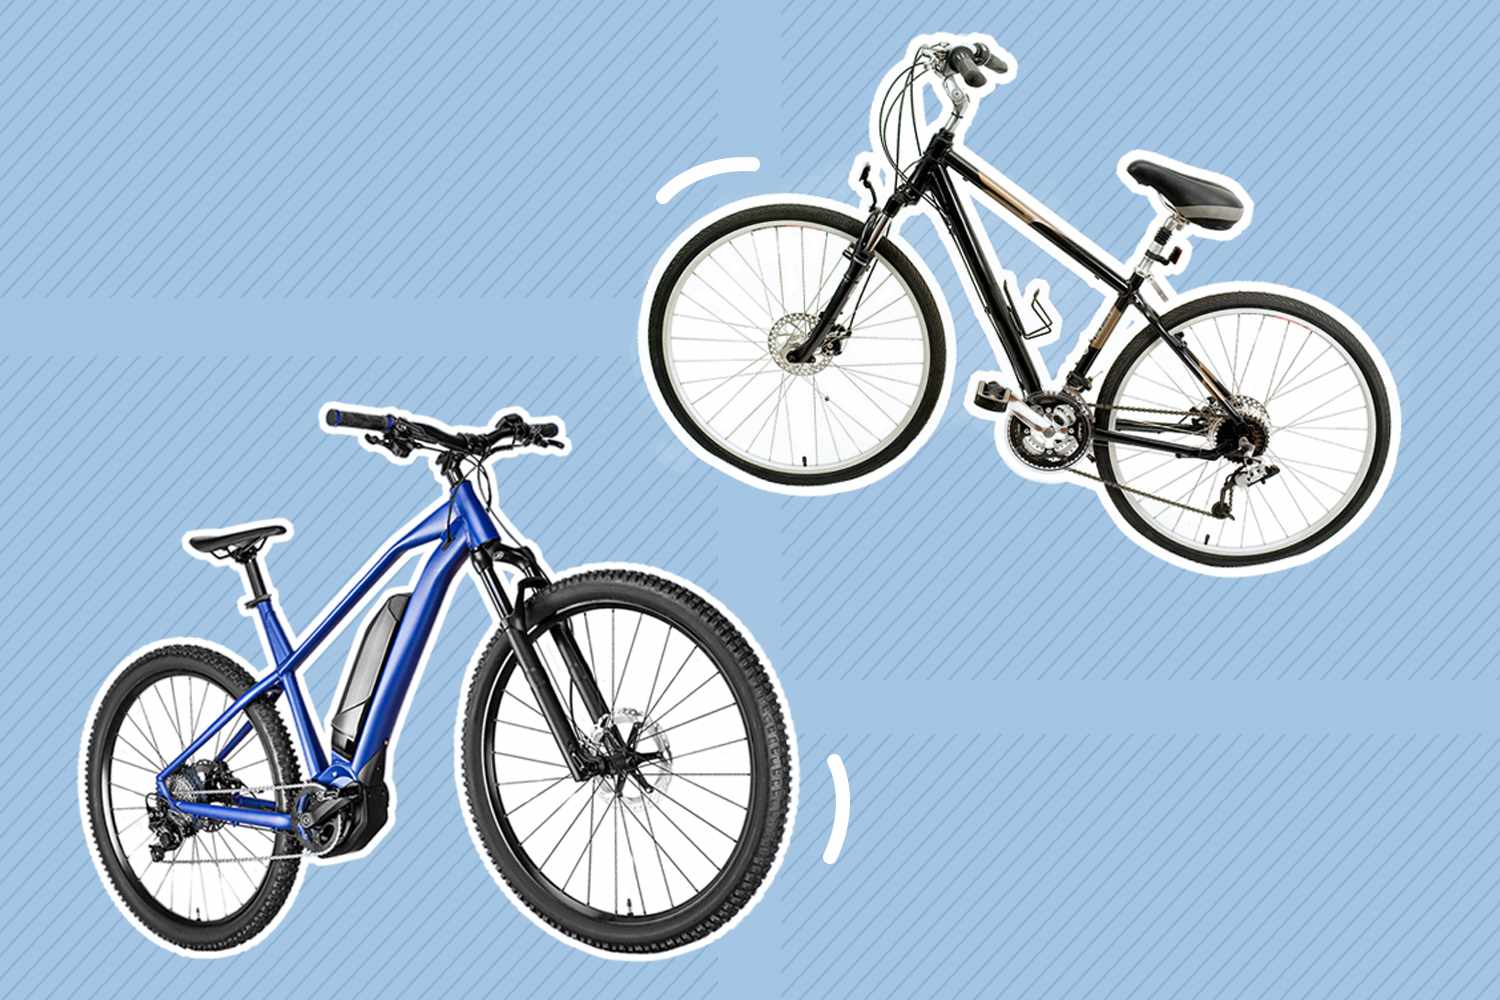 Best bikes for women collaged against blue striped background